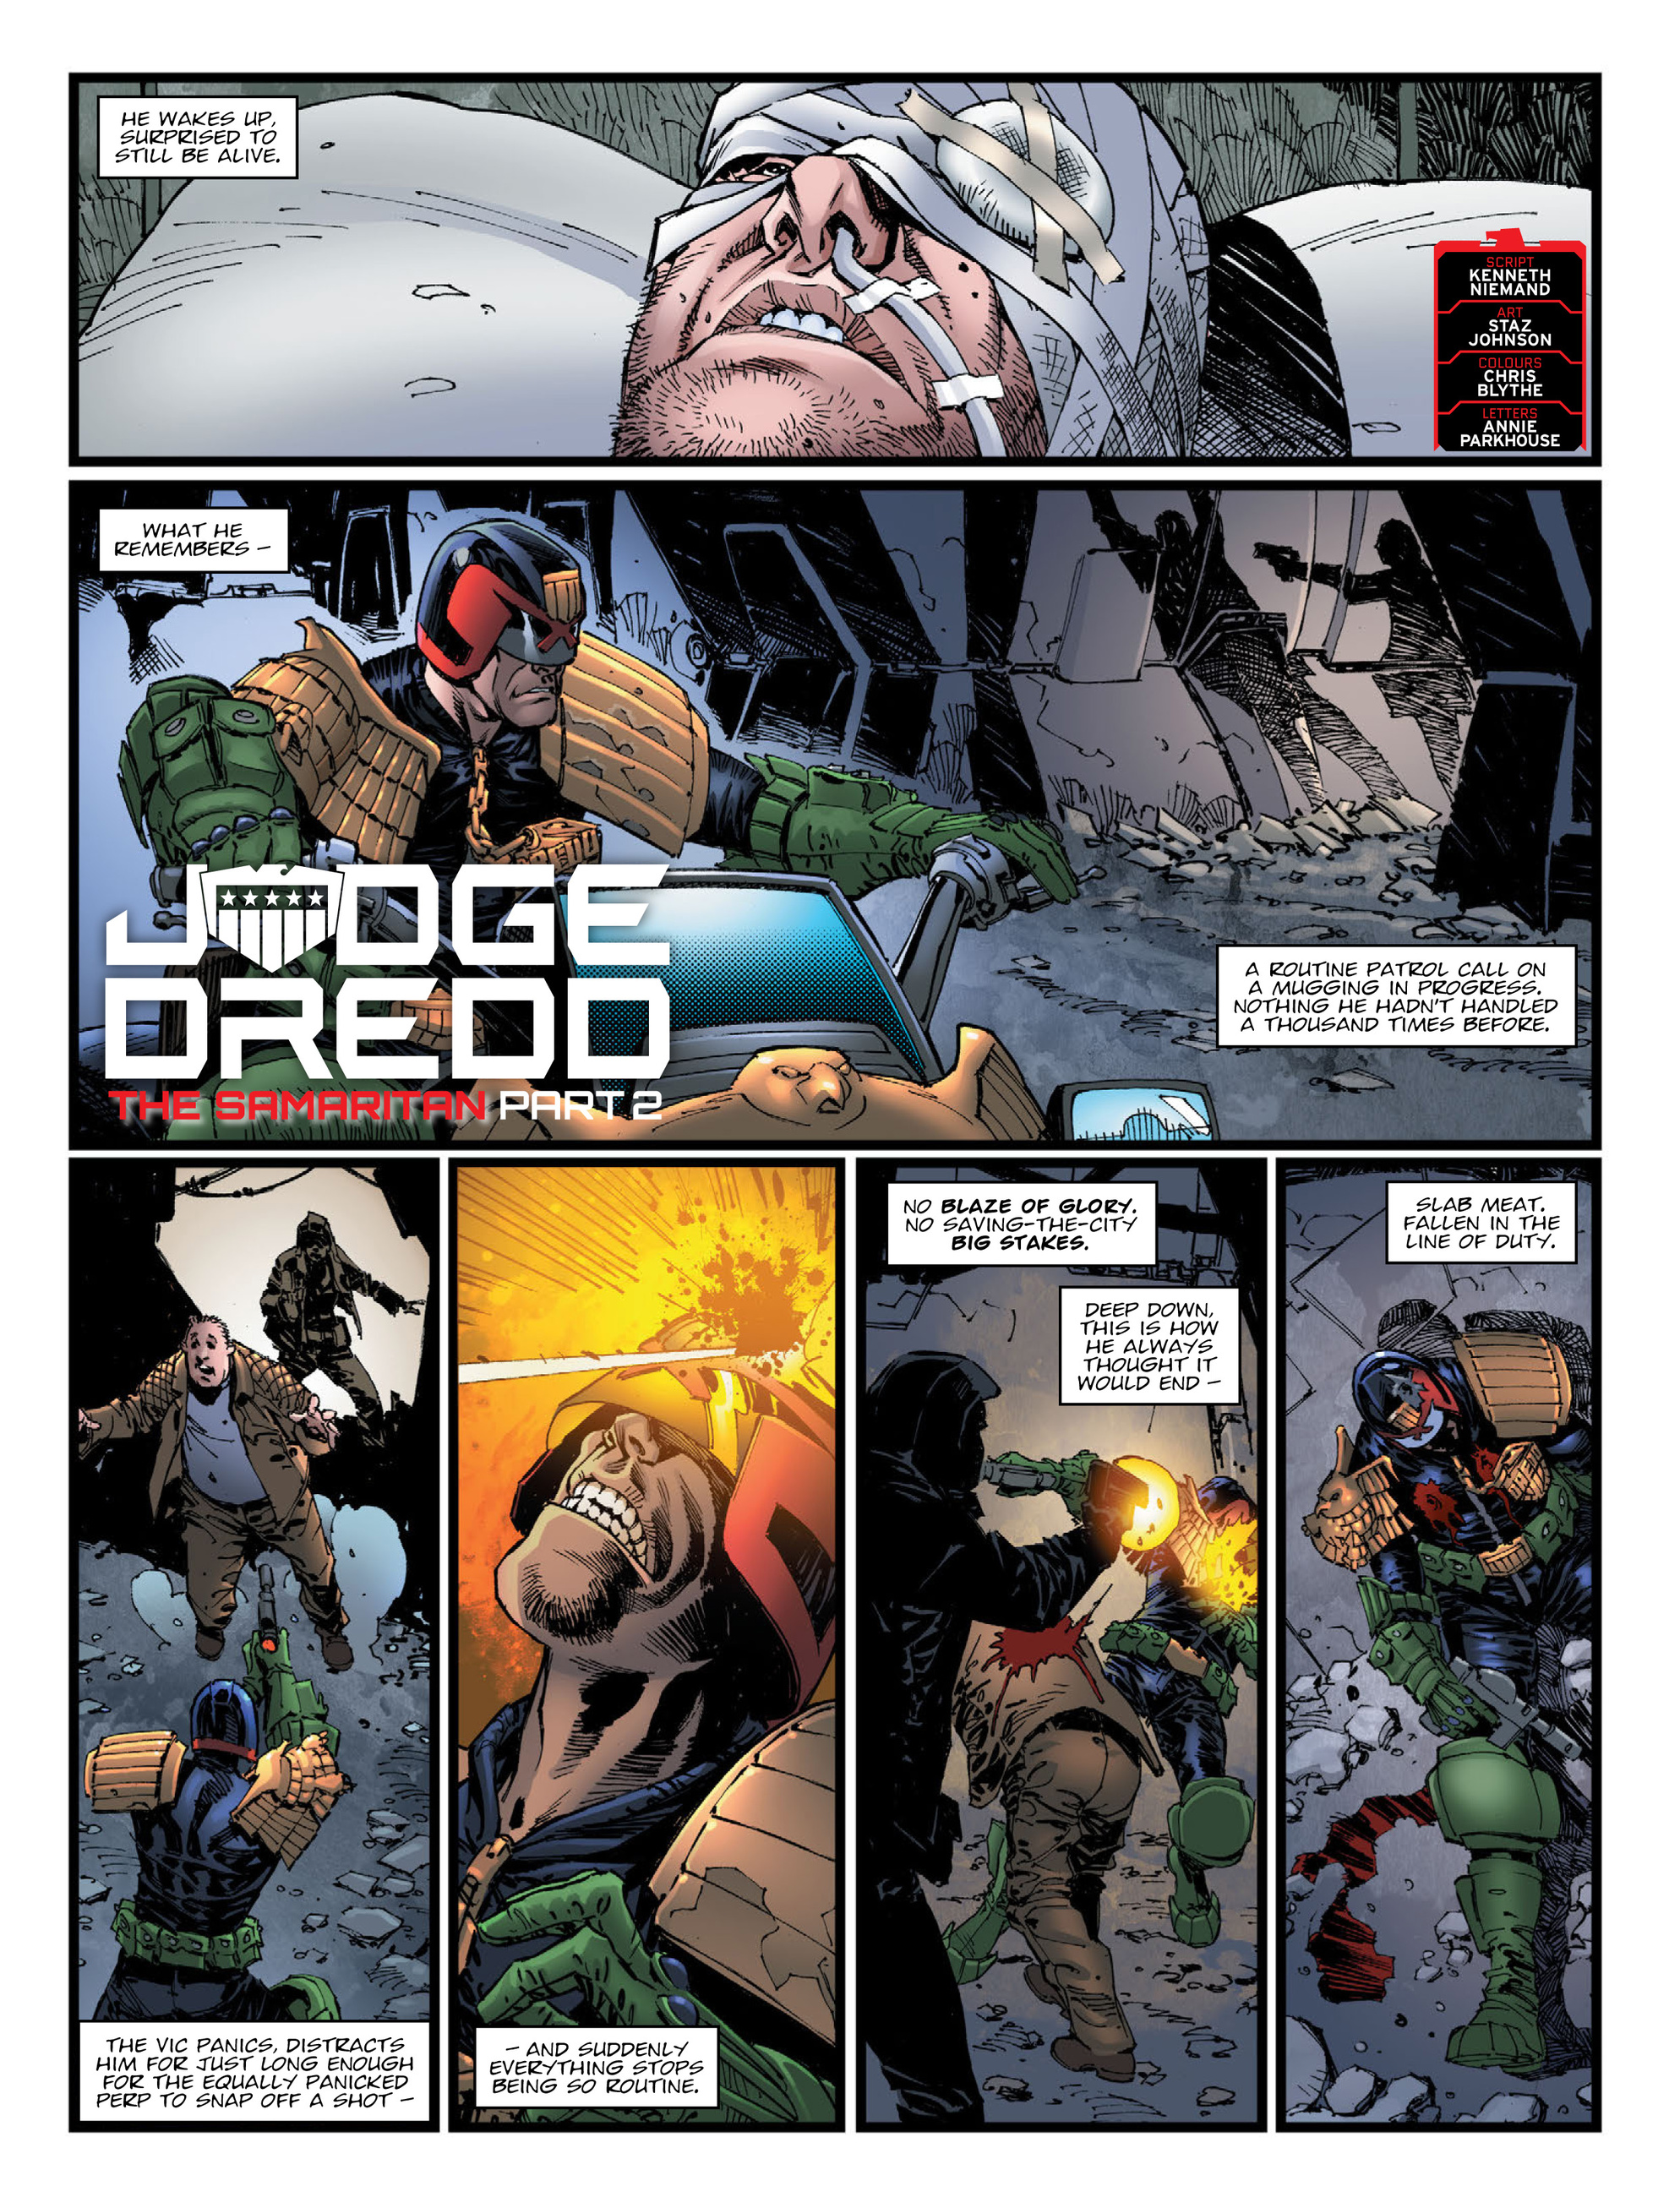 2000 AD: Chapter 2137 - Page 3